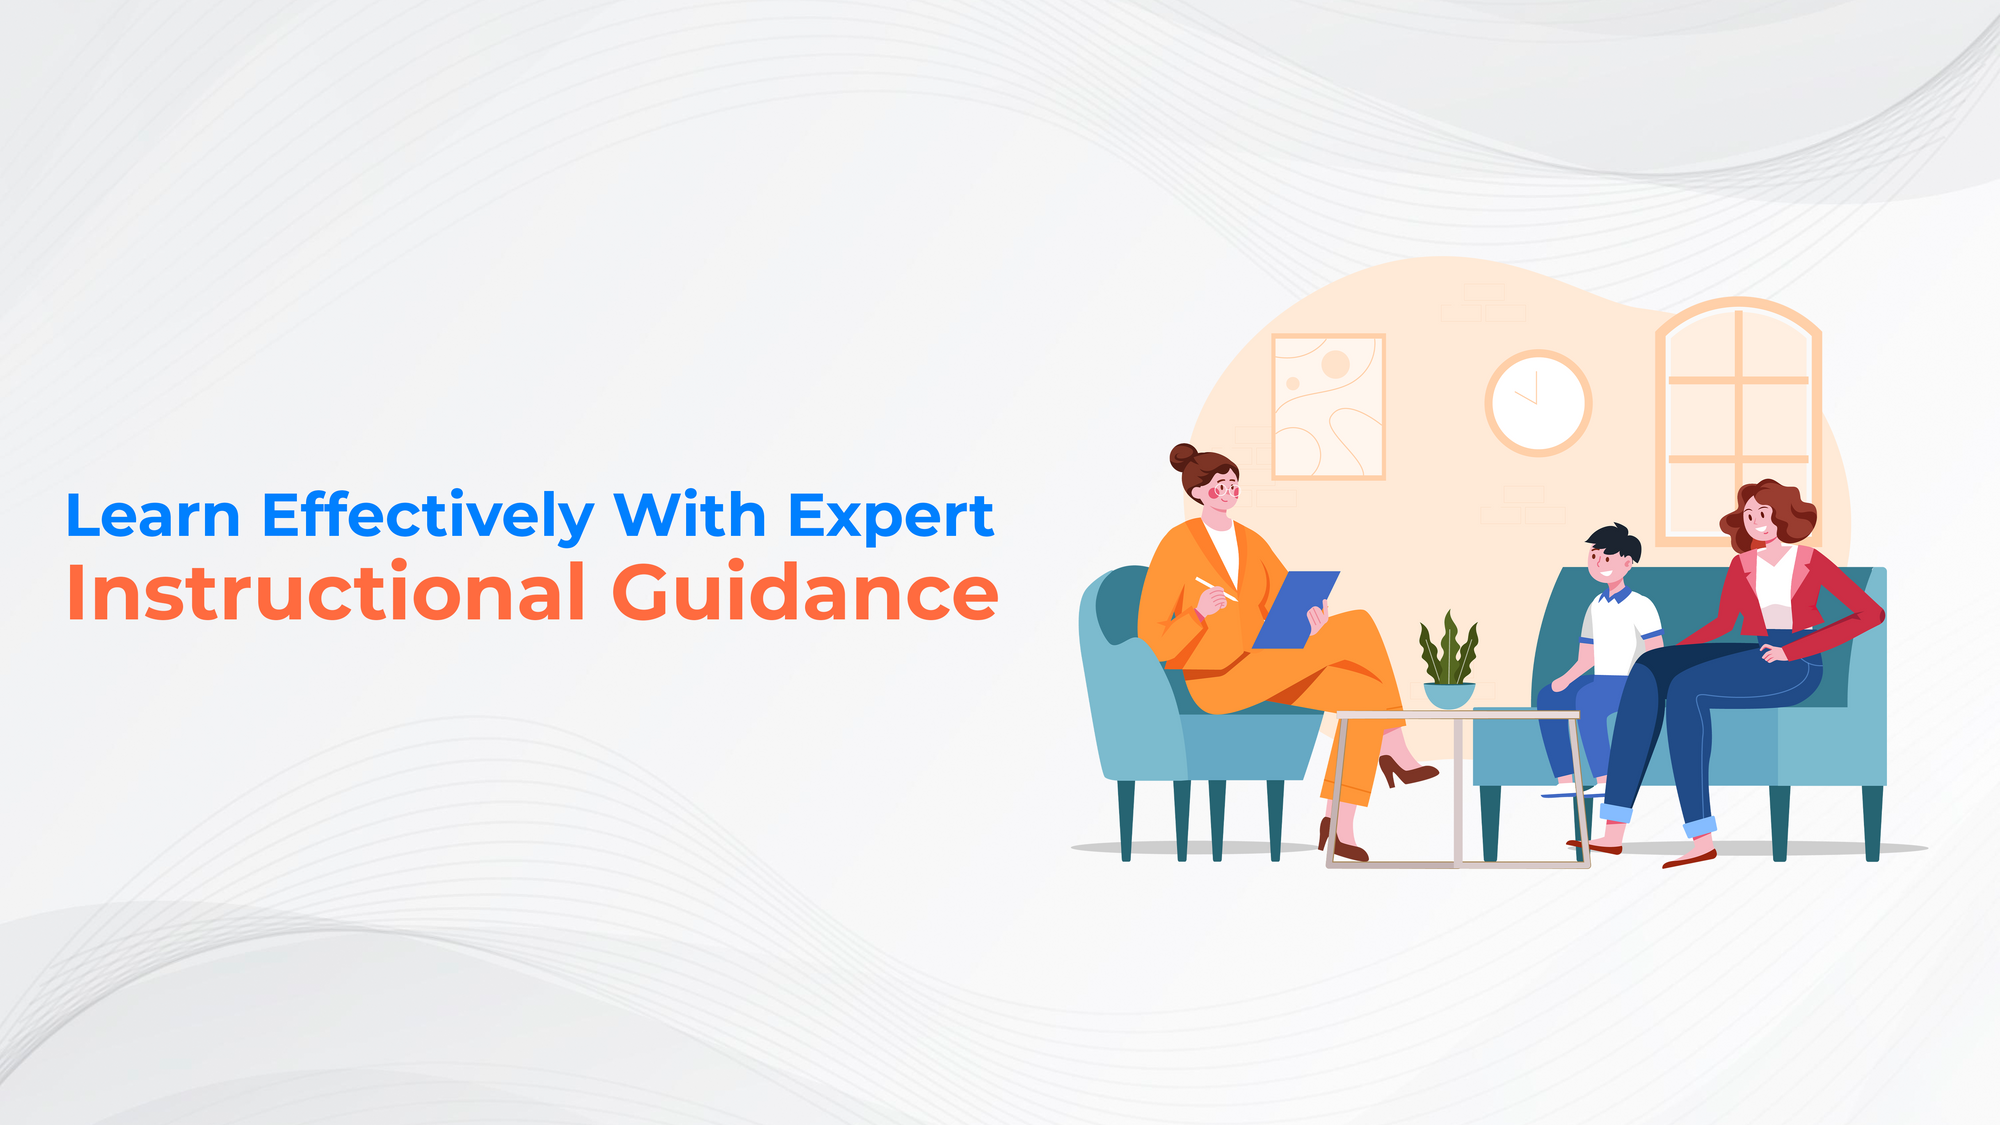 Learn Effectively With Expert Instructional Guidance